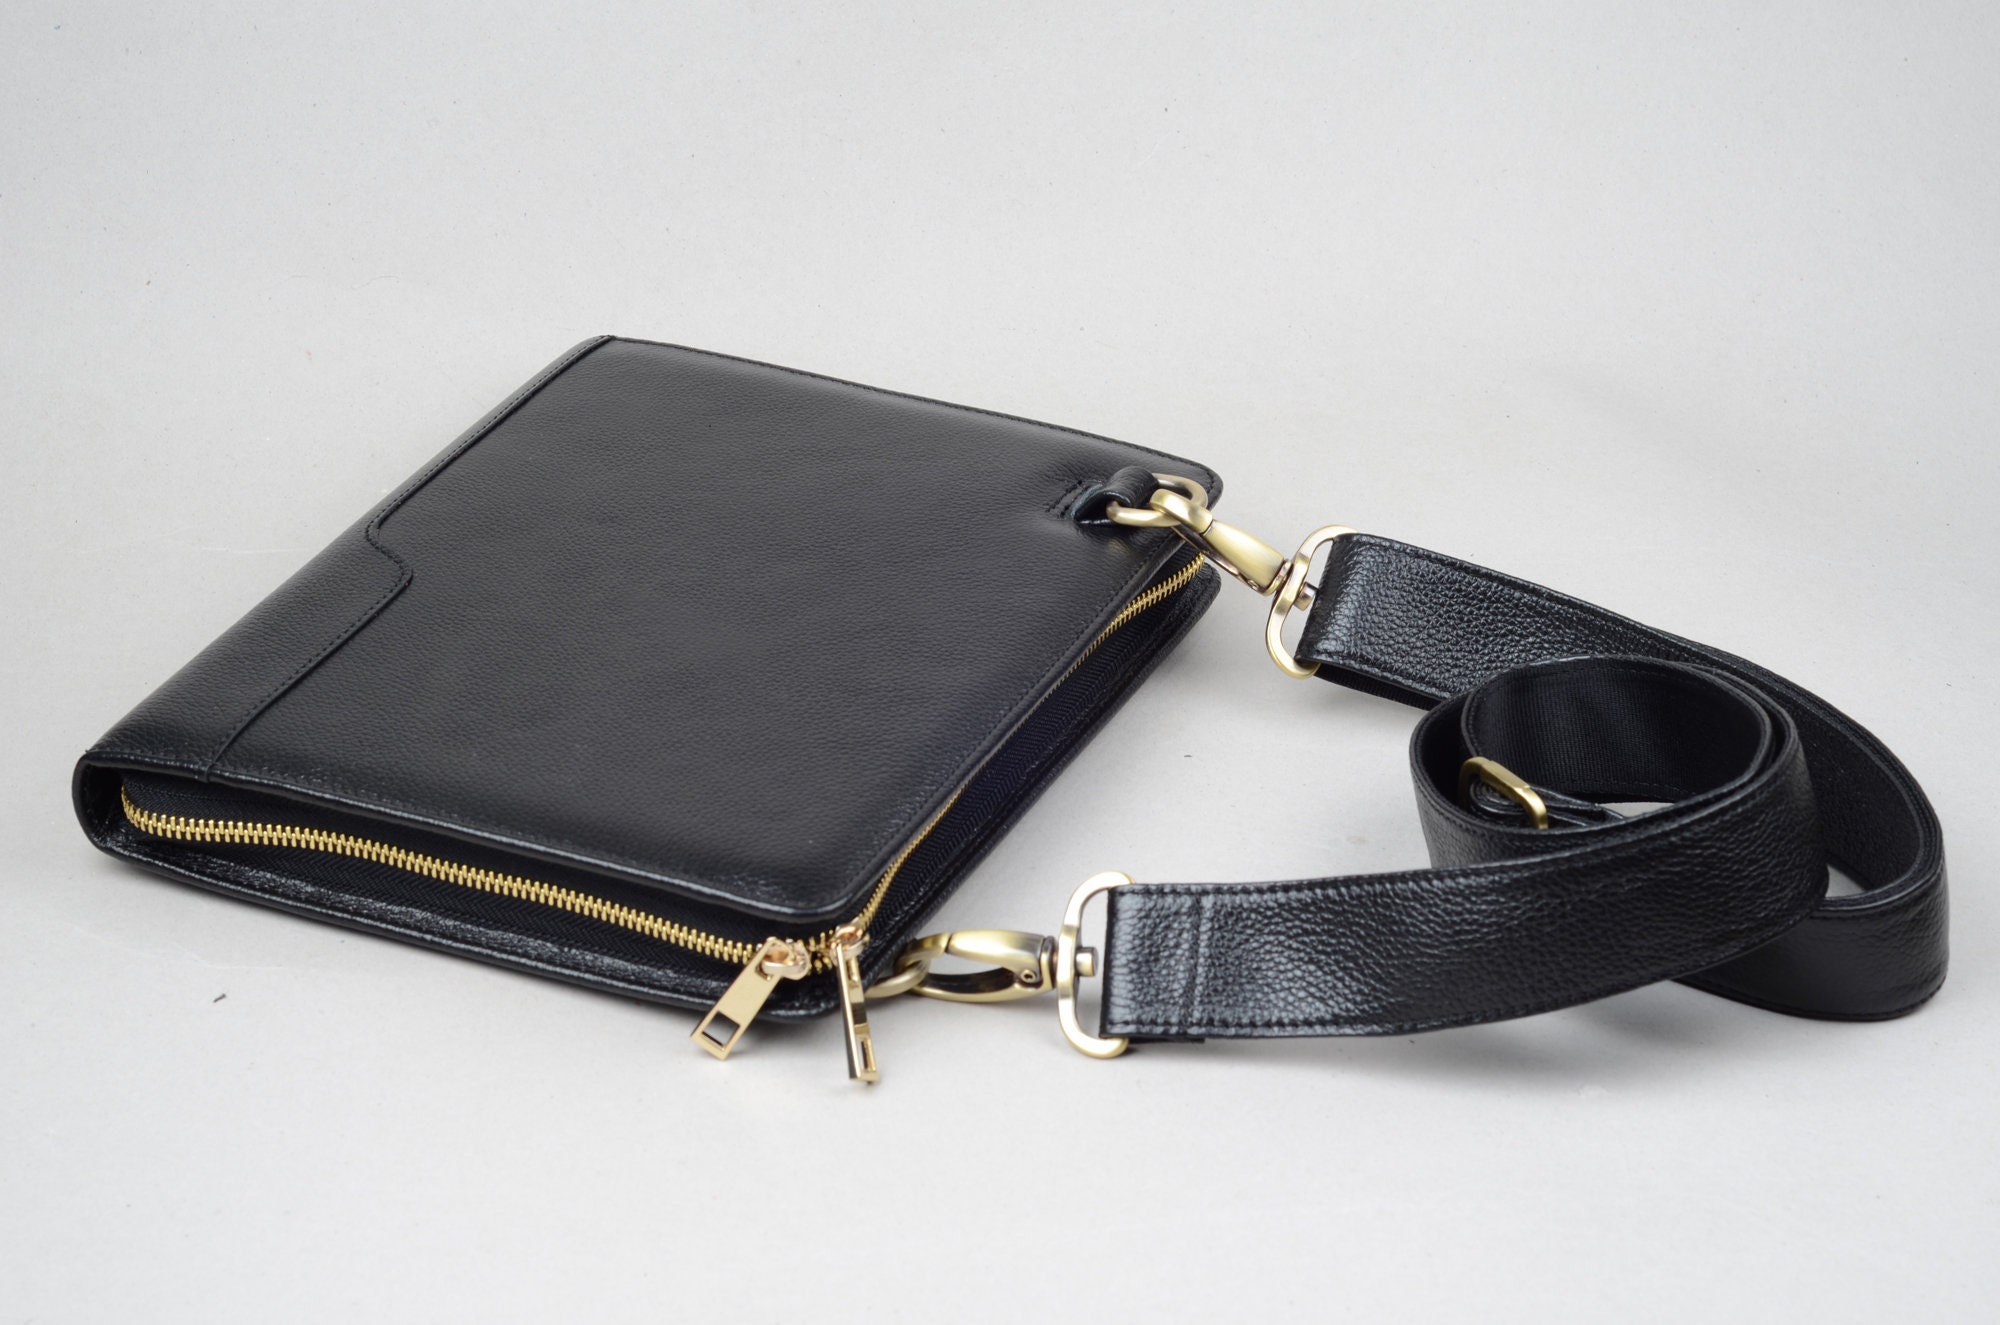 Premium Portfolio With Shoulder Strap, for iPad and MacBook | iCarryalls  Leather Fashion